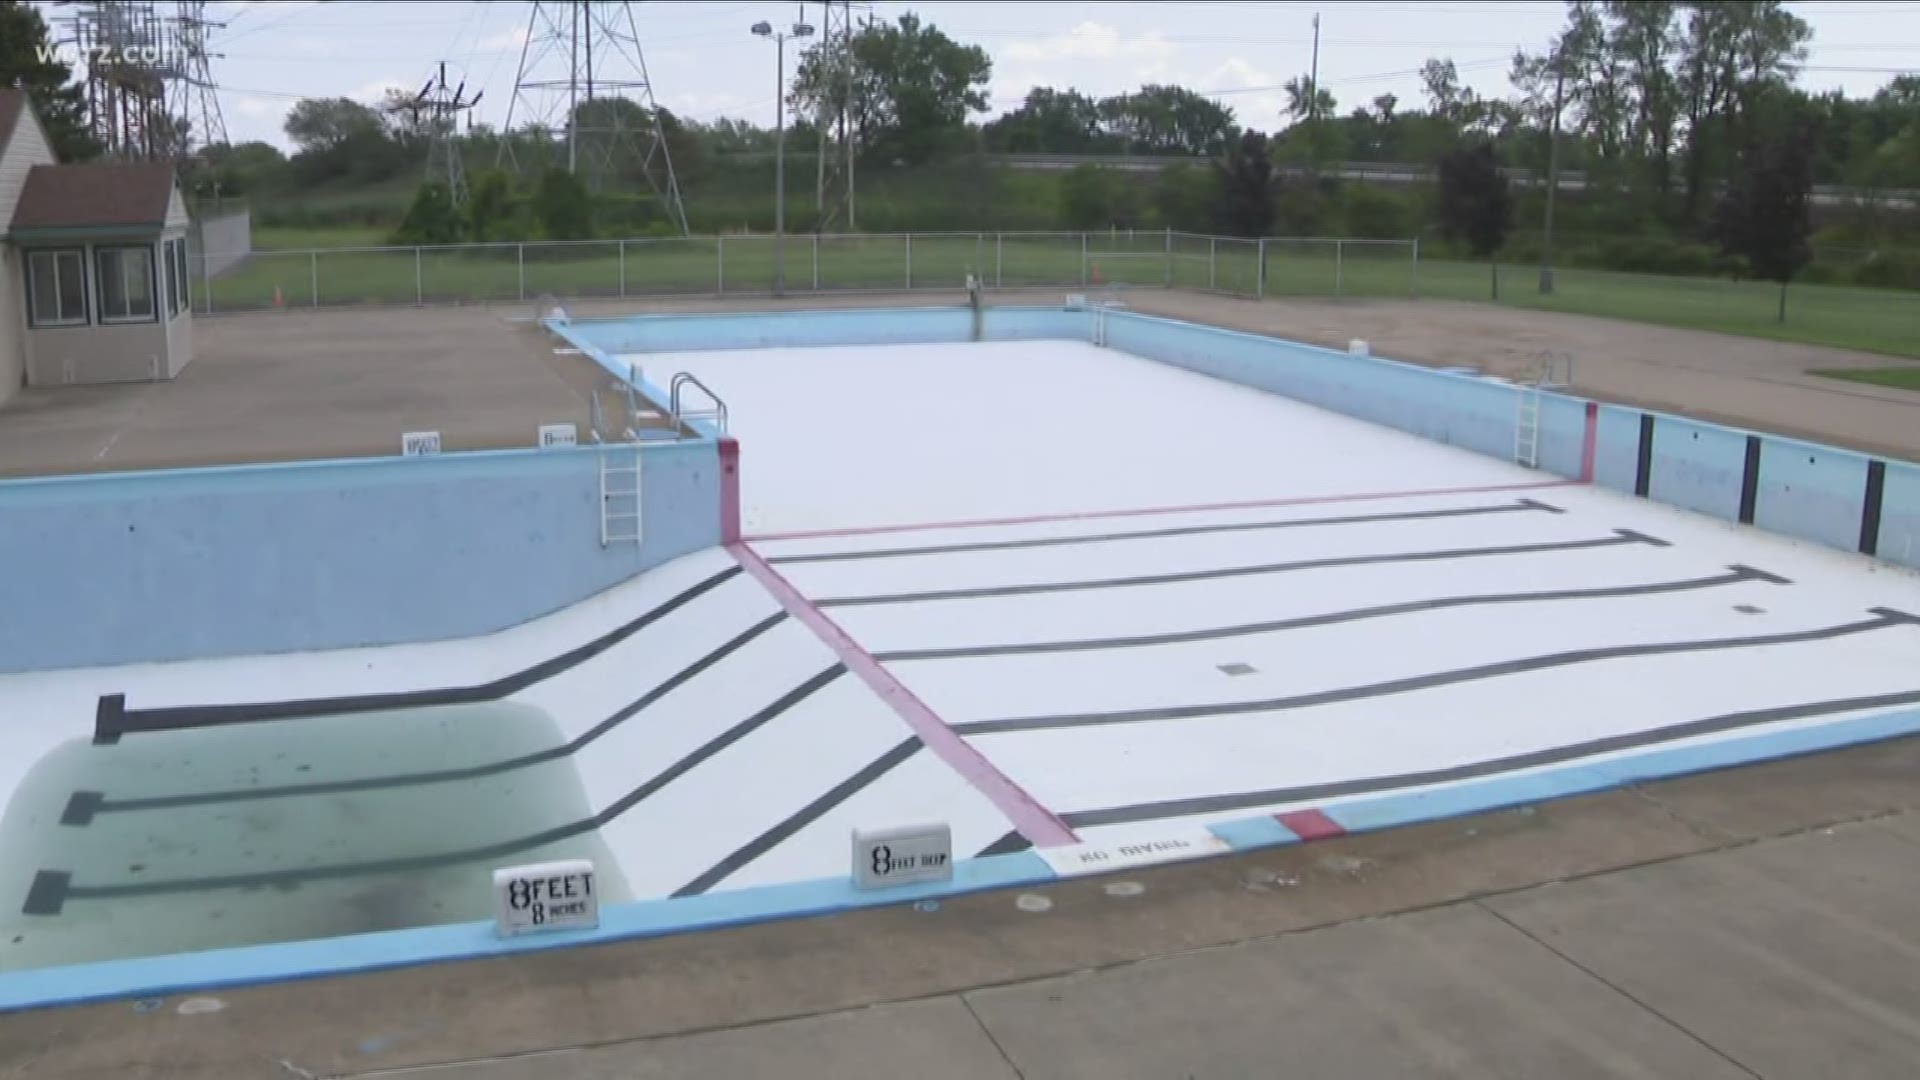 The proposal to replace Brighton Pool has been met with controversy